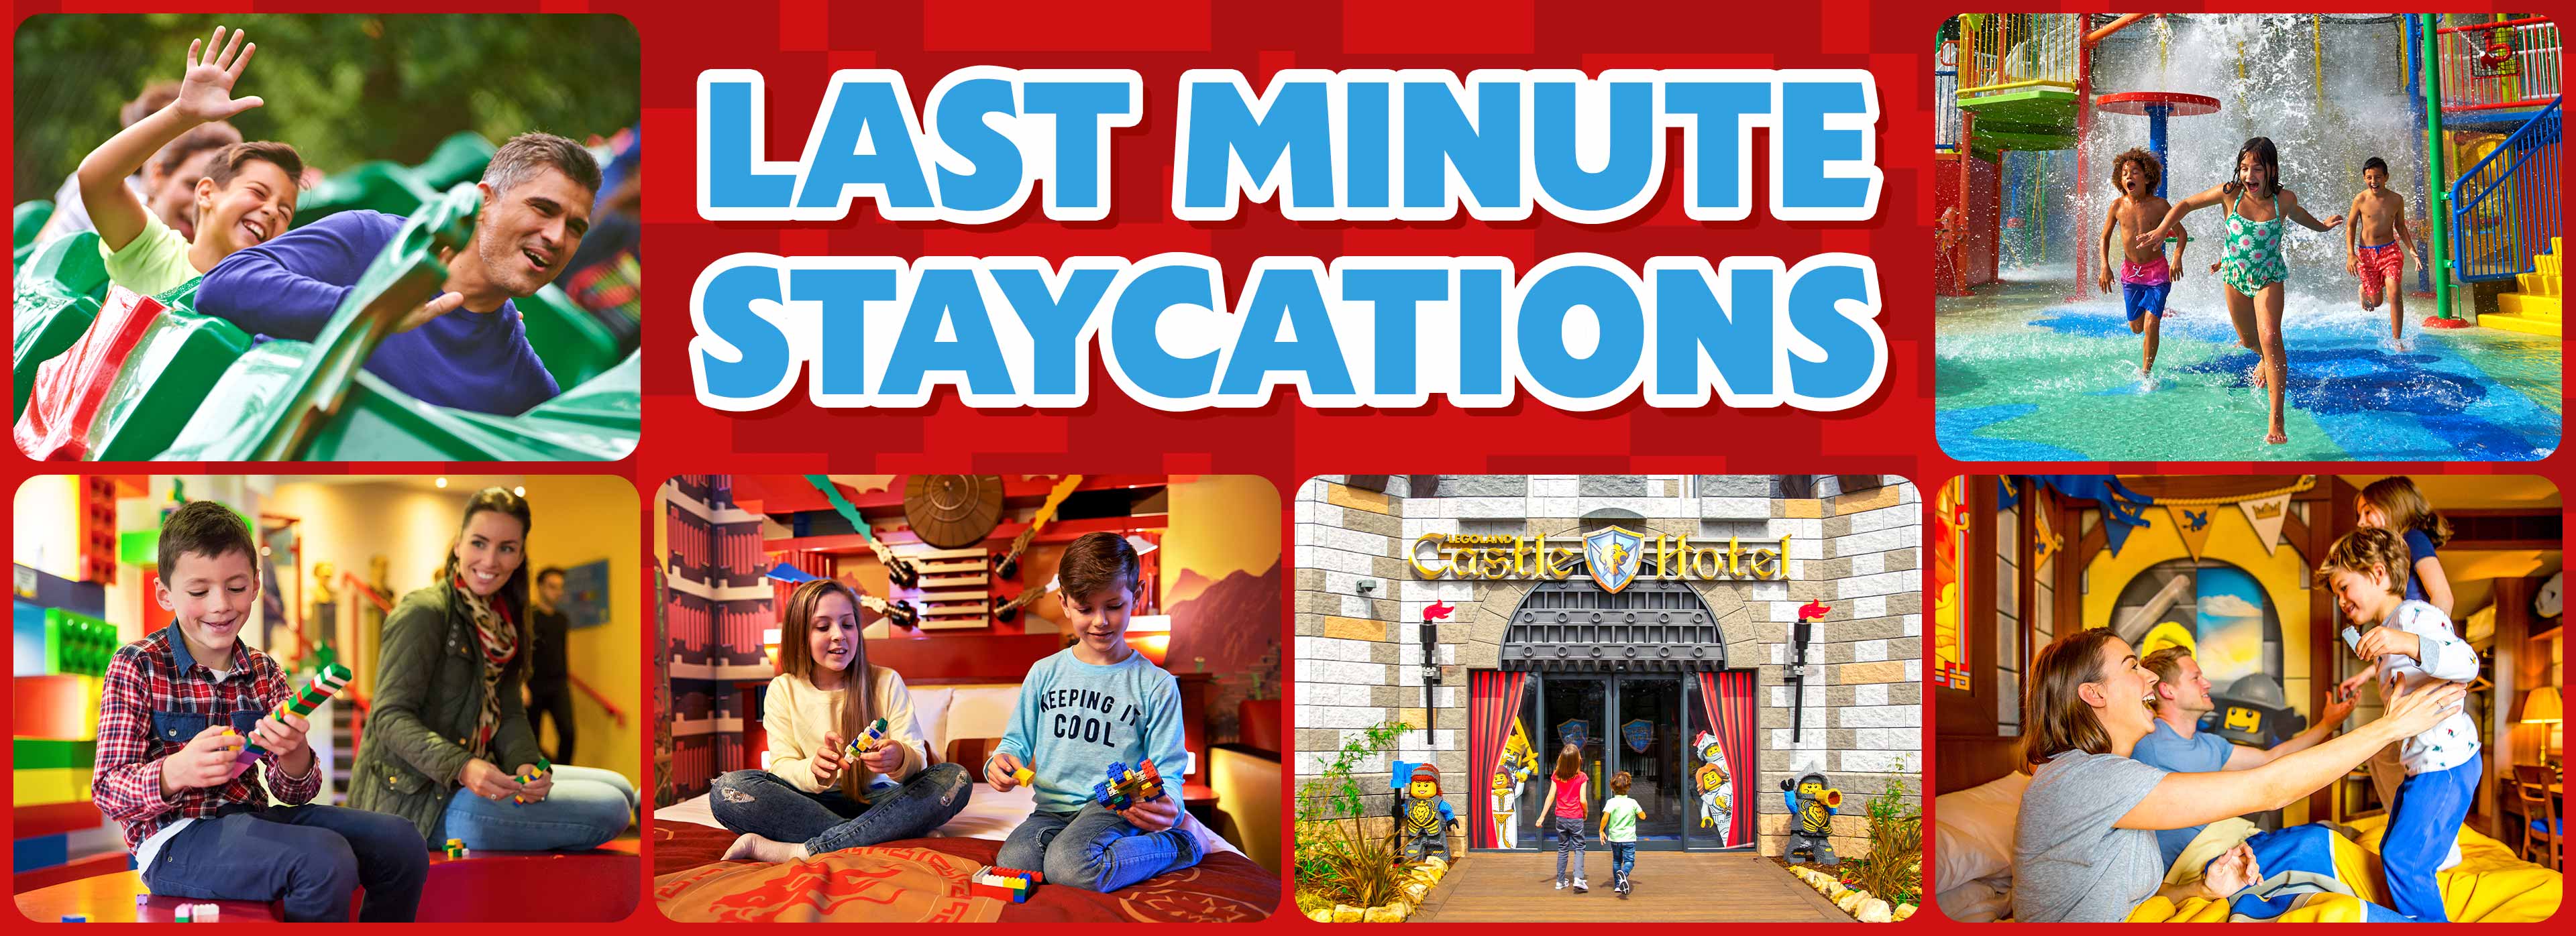 Last minute staycations  at the LEGOLAND Windsor Resort